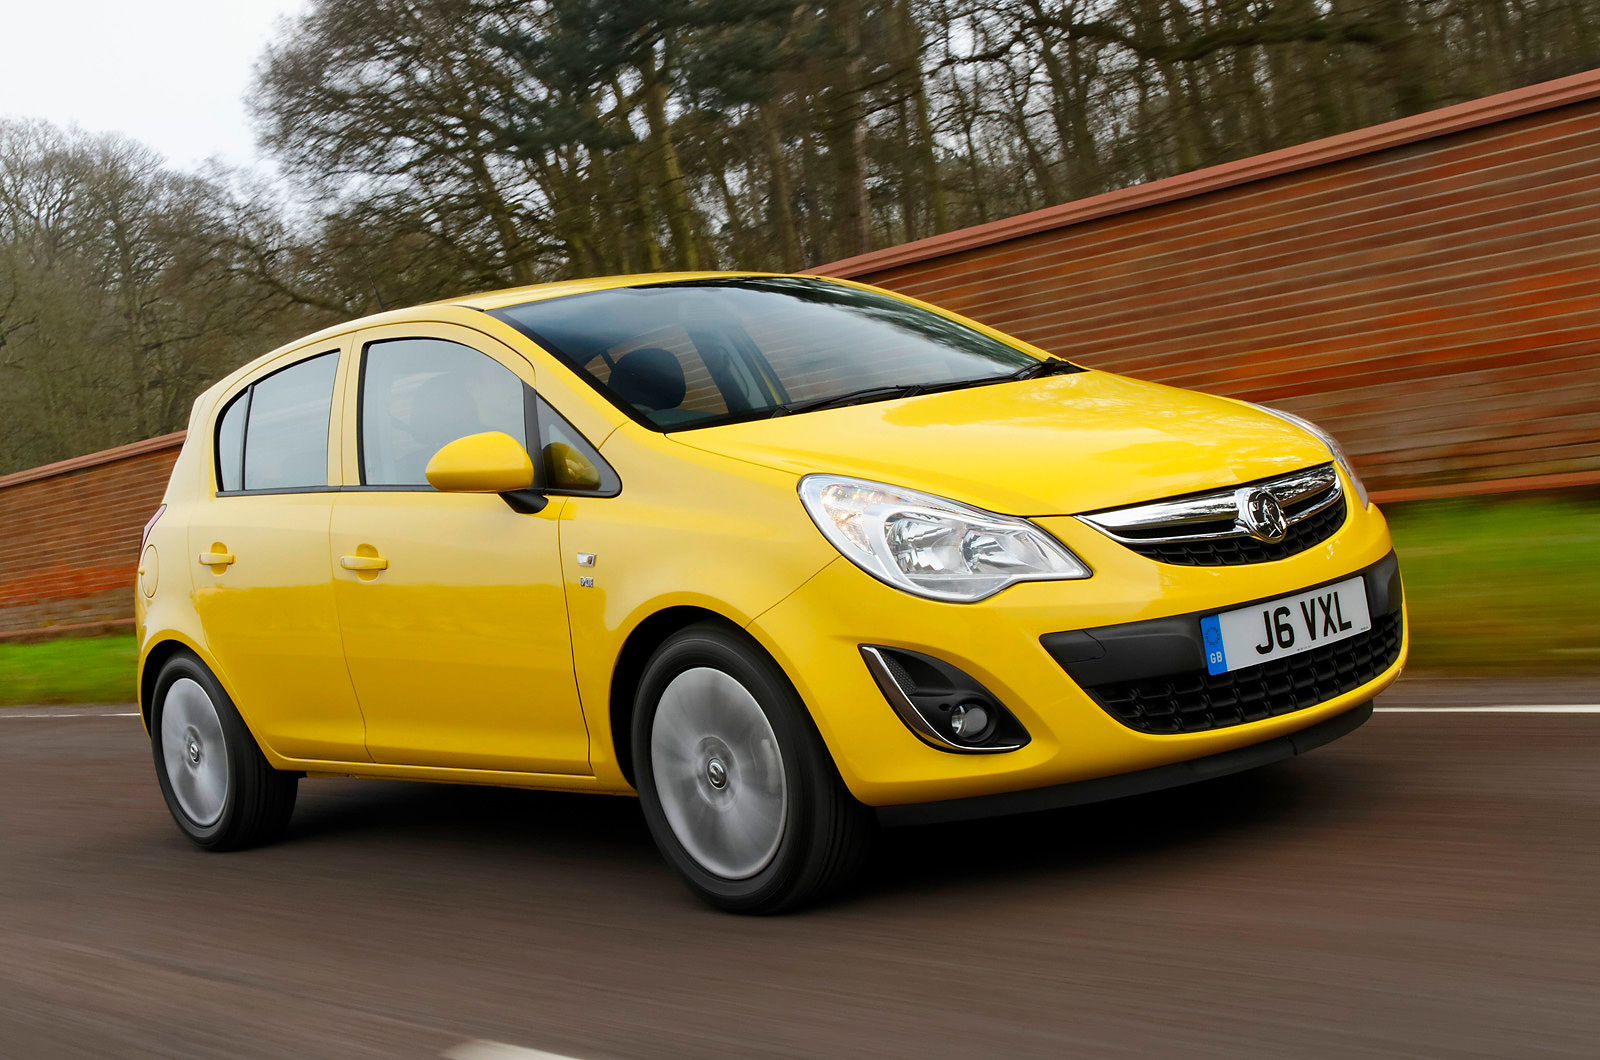 Opel Corsa : Price, Mileage, Images, Specs & Reviews 